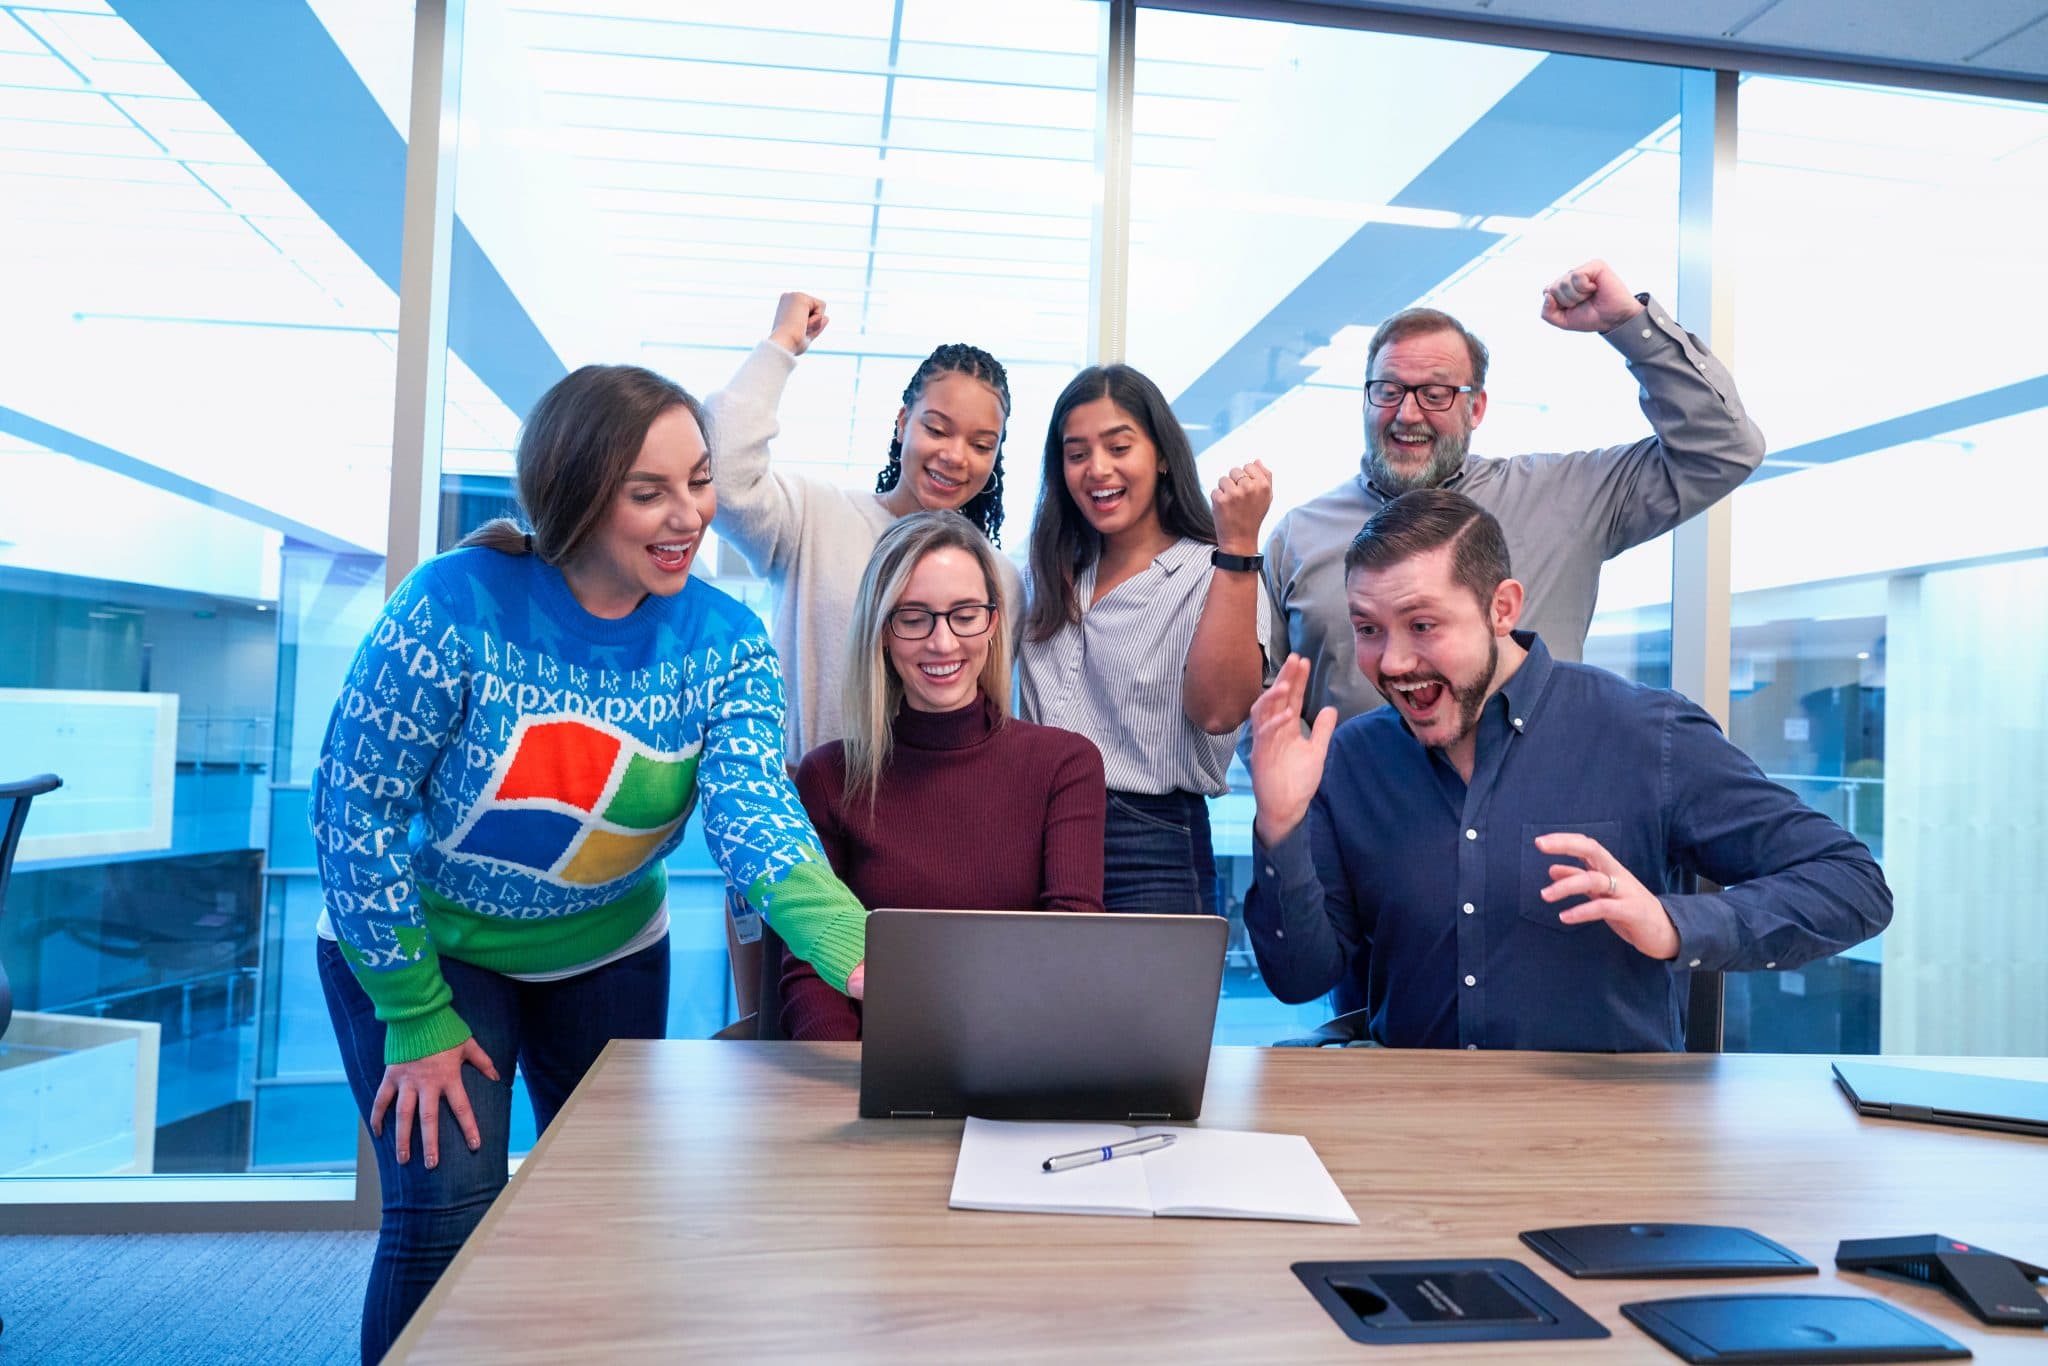 Team of people in an office celebrating their success in front of a laptop